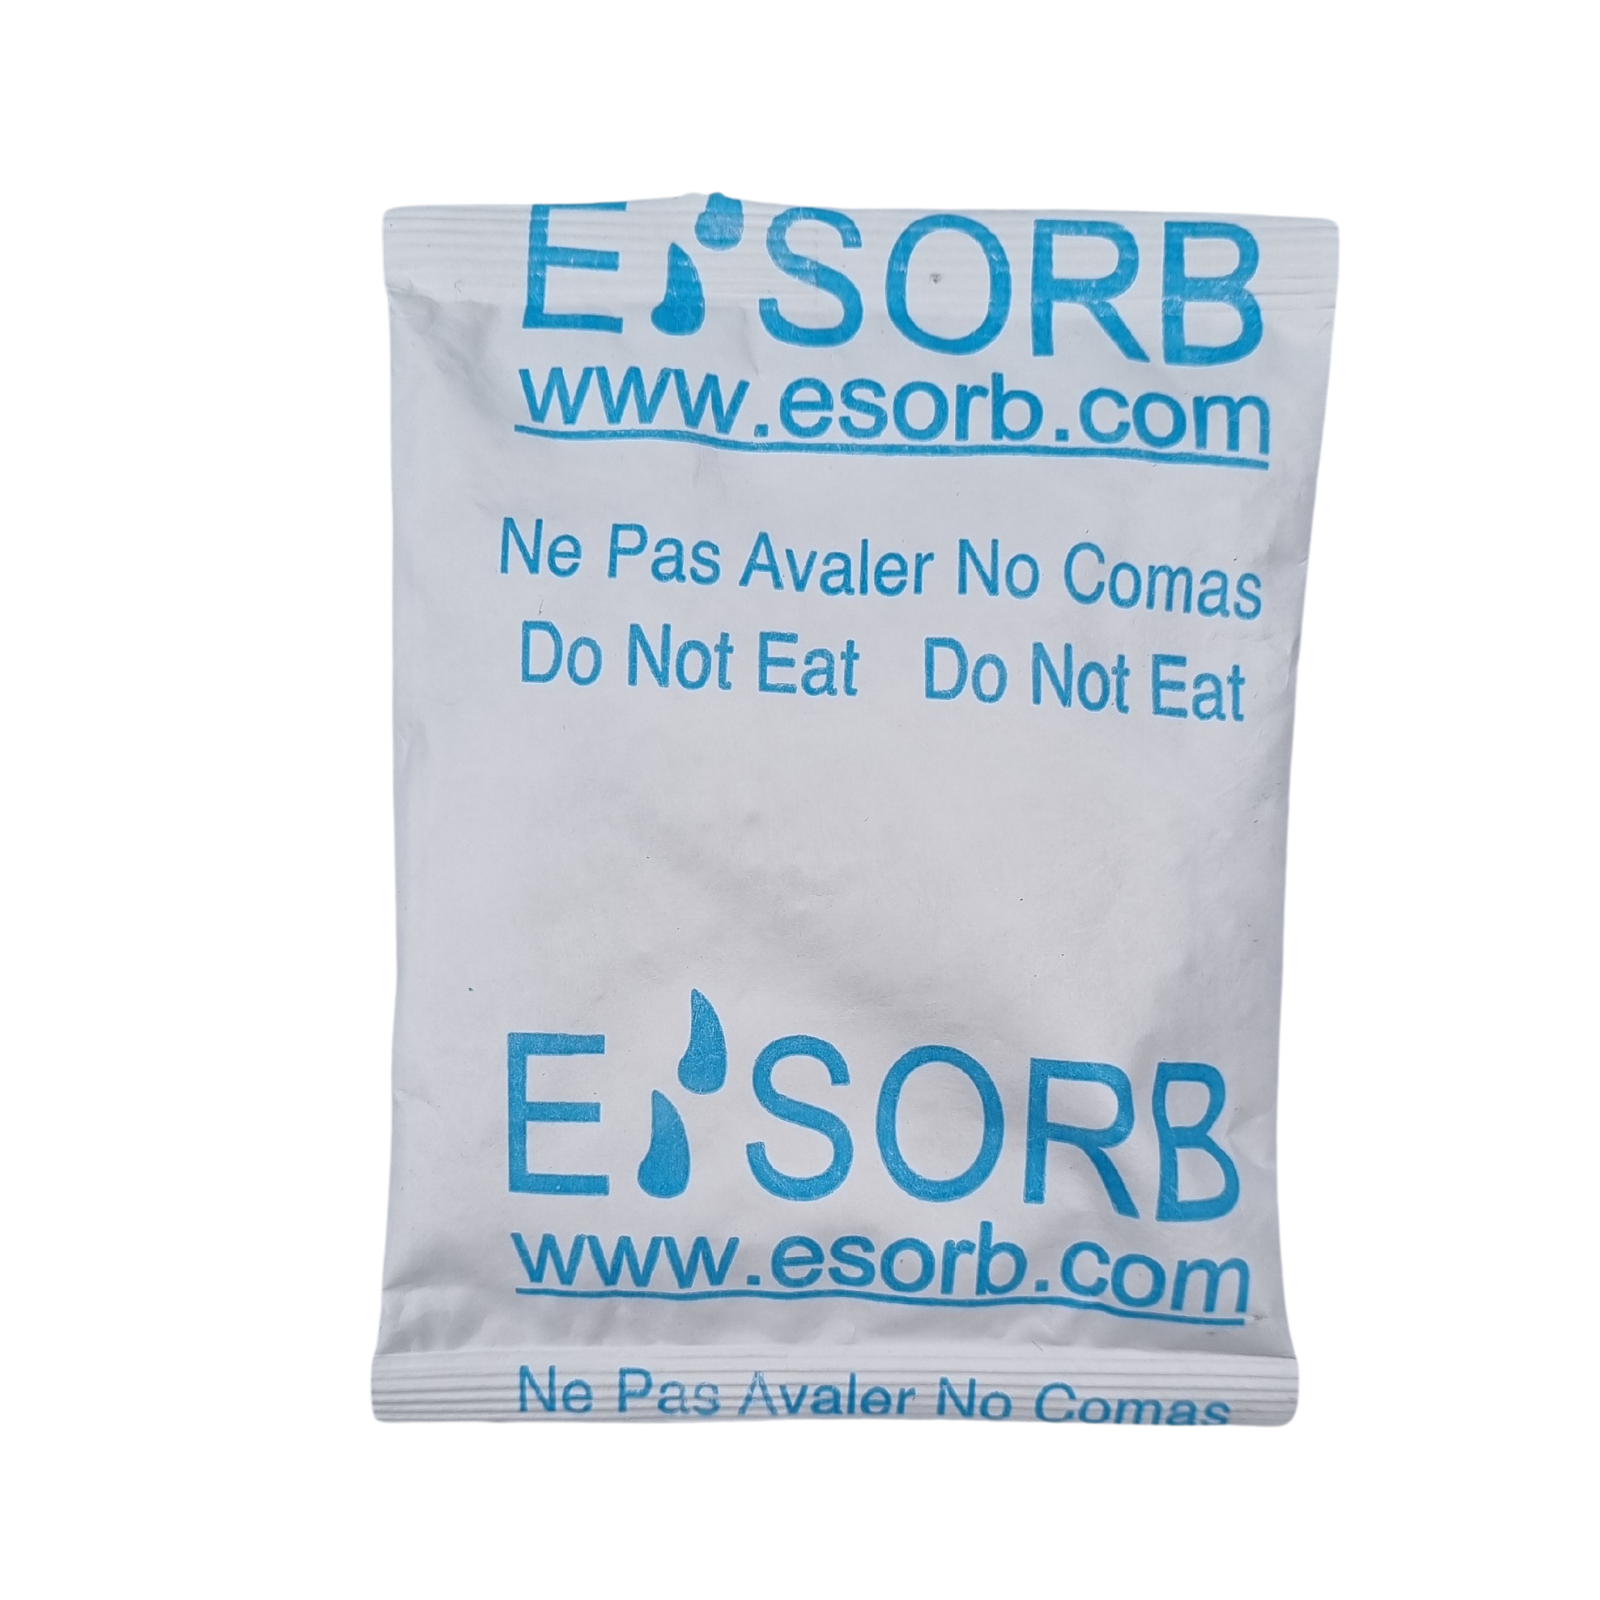 Esorb Mineral Desiccant combines the power of calcium chloride and montmorillonite clay.